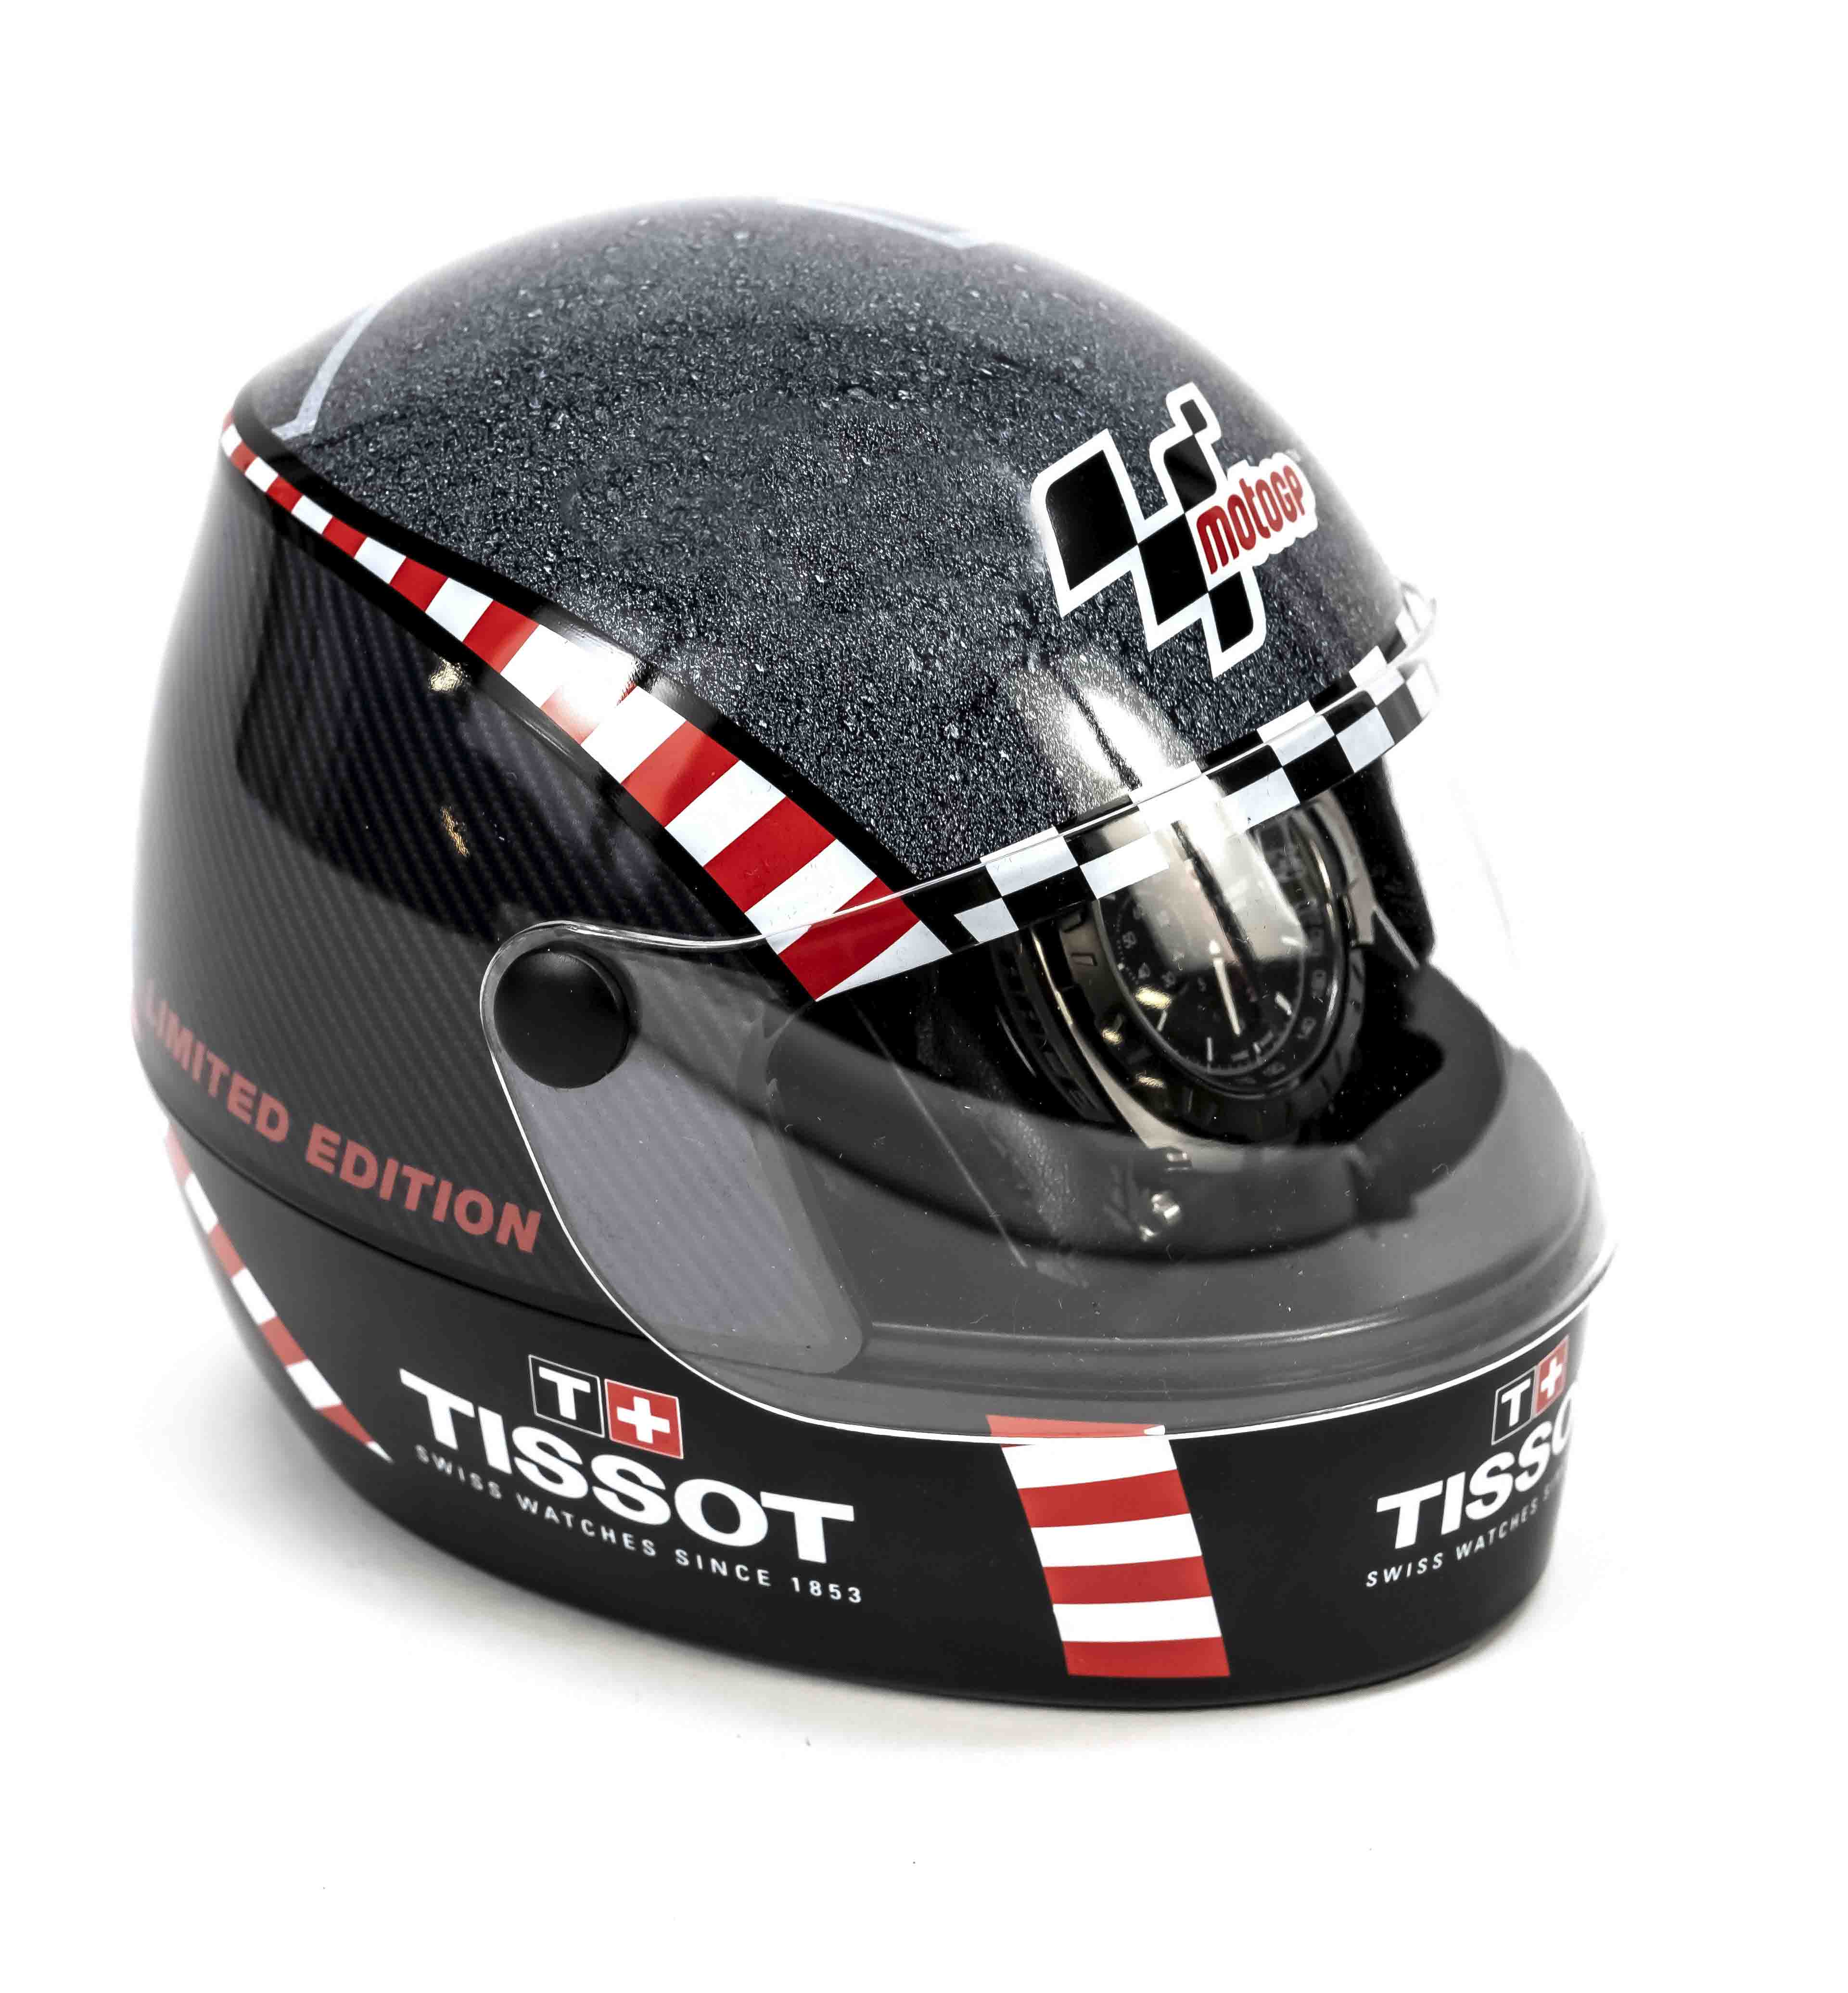 Tissot MotoGP, automatic, chronograph, men's watch ref. T092427 A GP16, Limited Edition 1832/3333, - Image 4 of 4